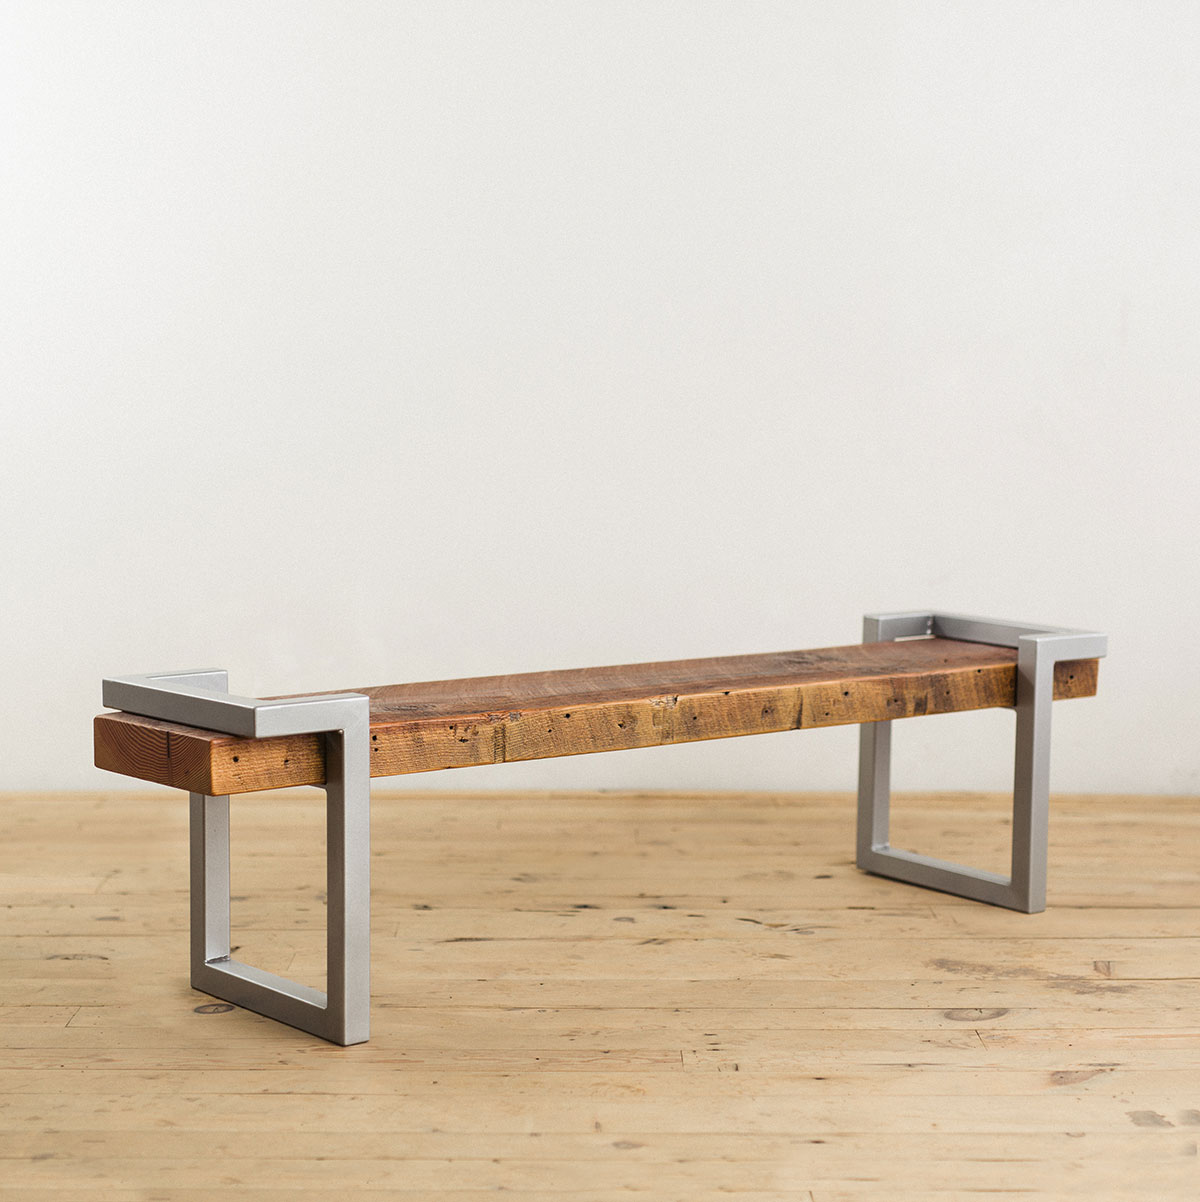 steel-salvage-barn-wood-bench-silver